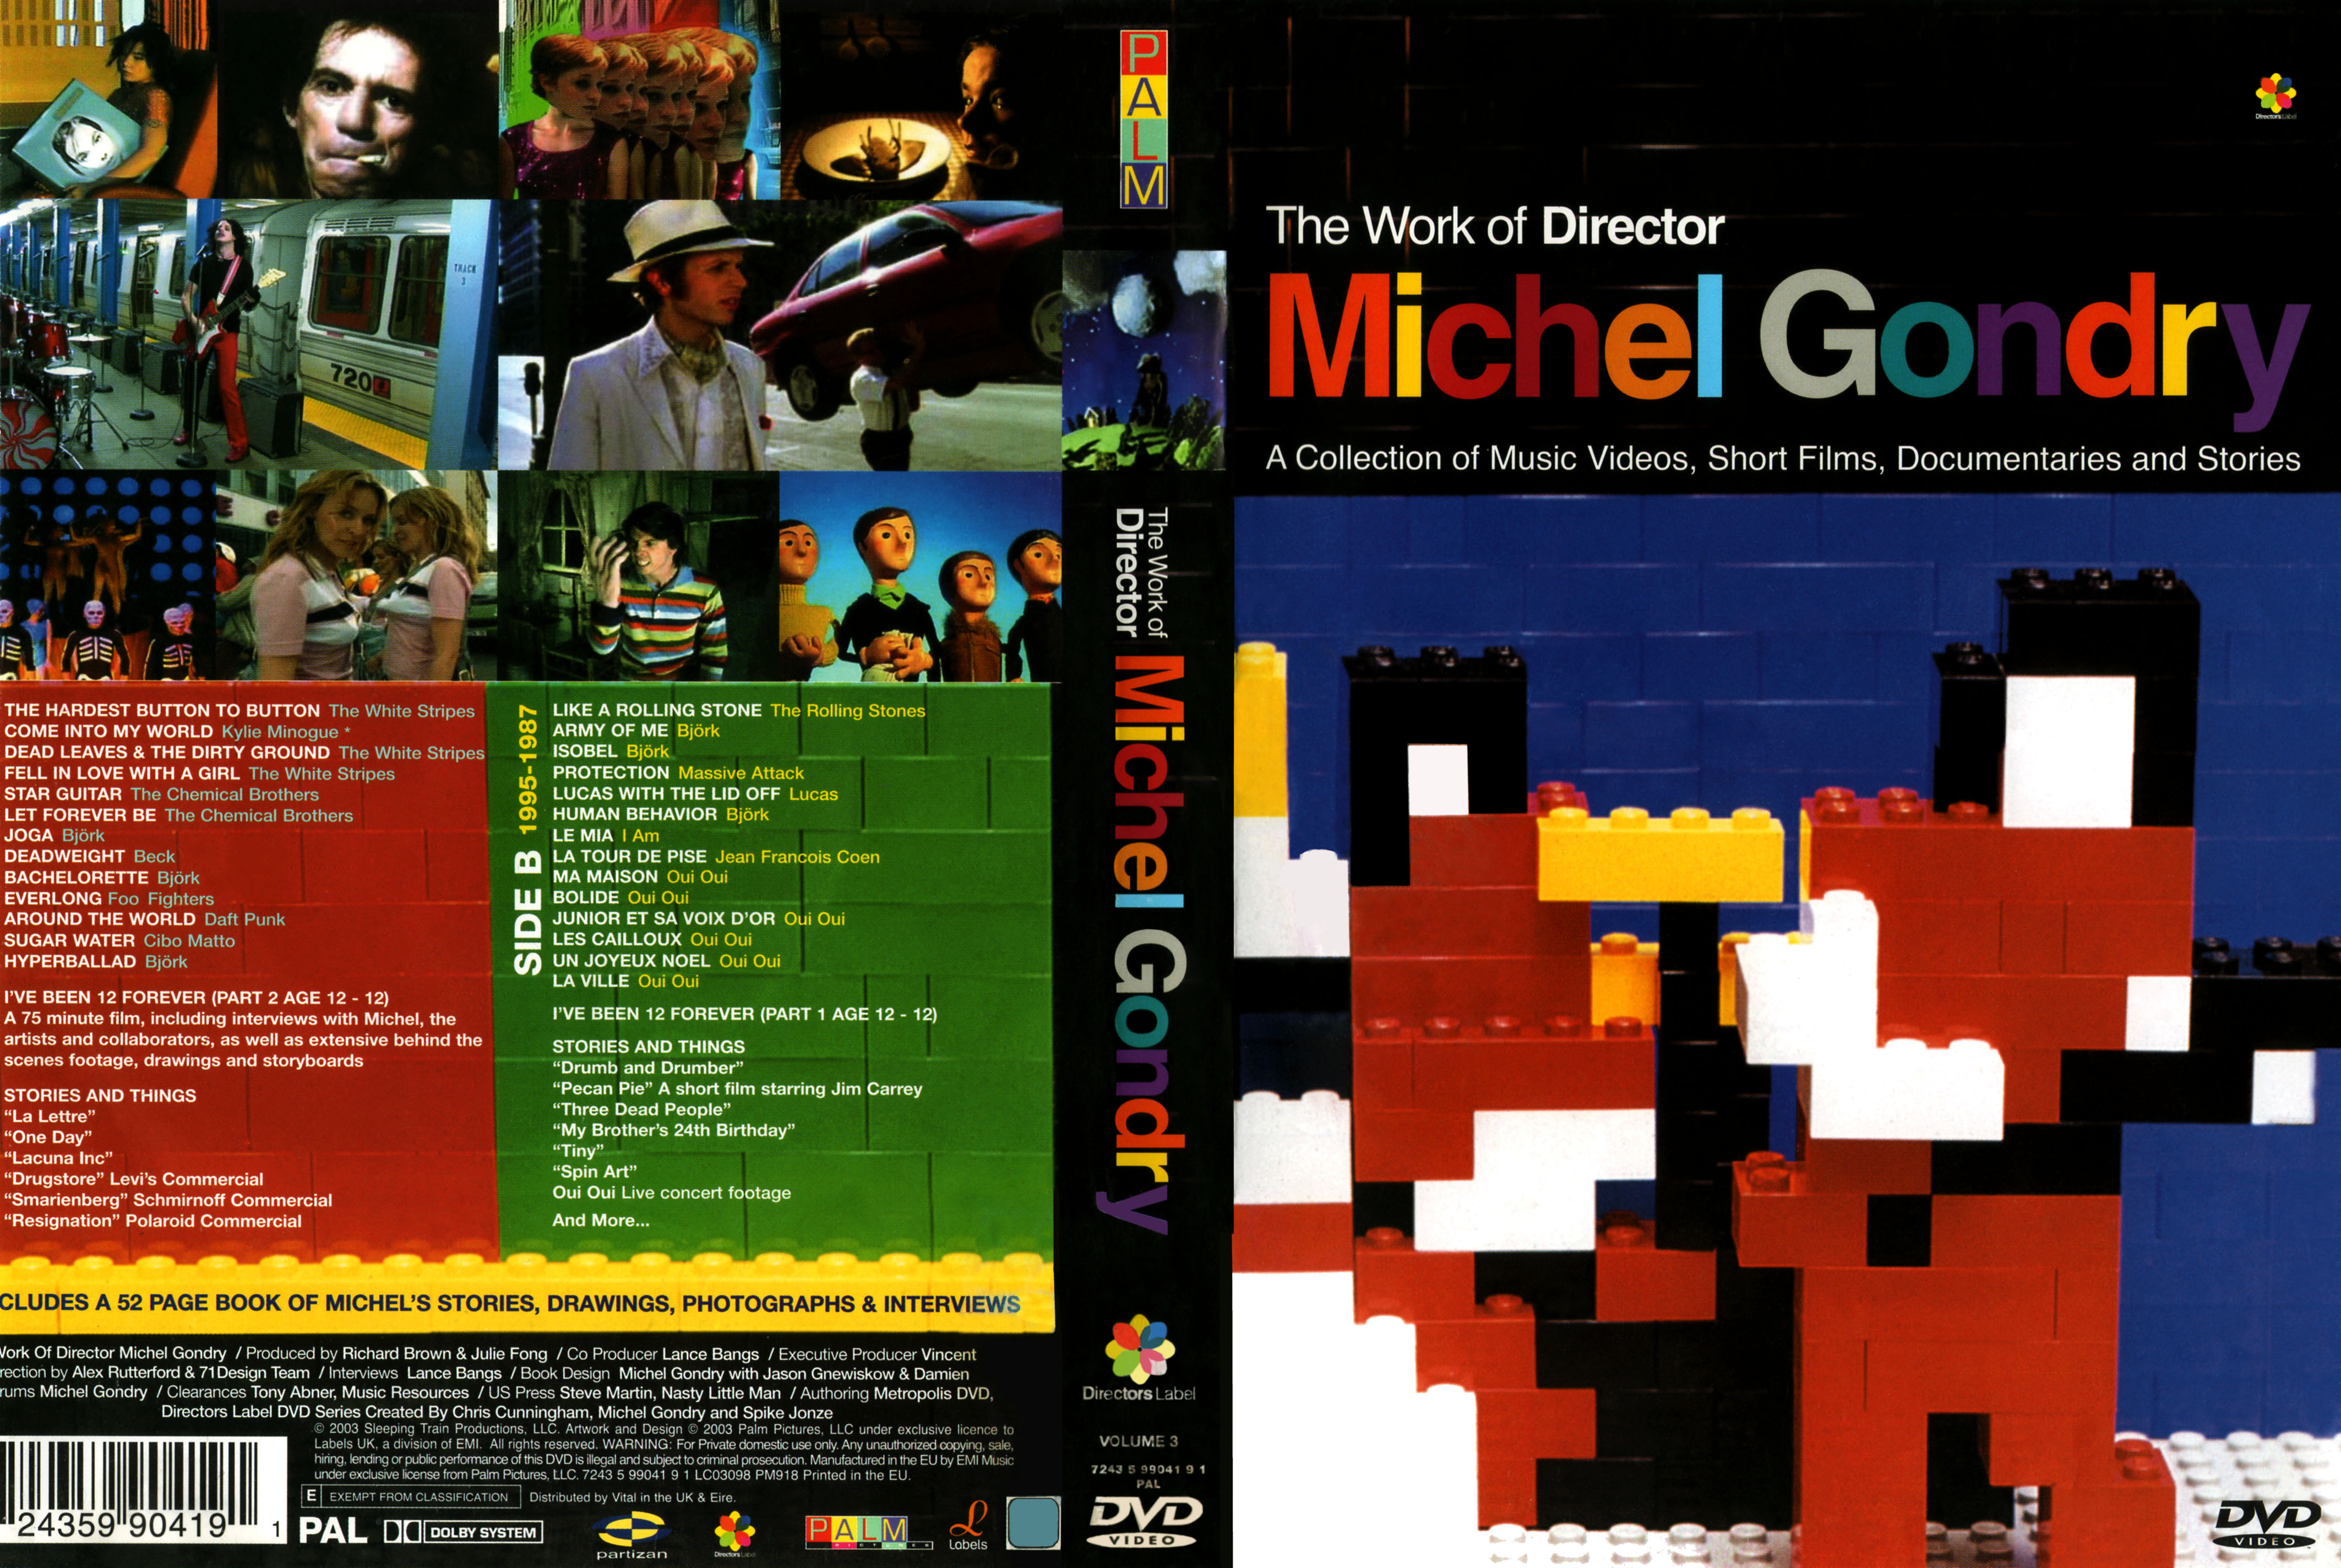 Jaquette DVD The work of director Michel Gondry